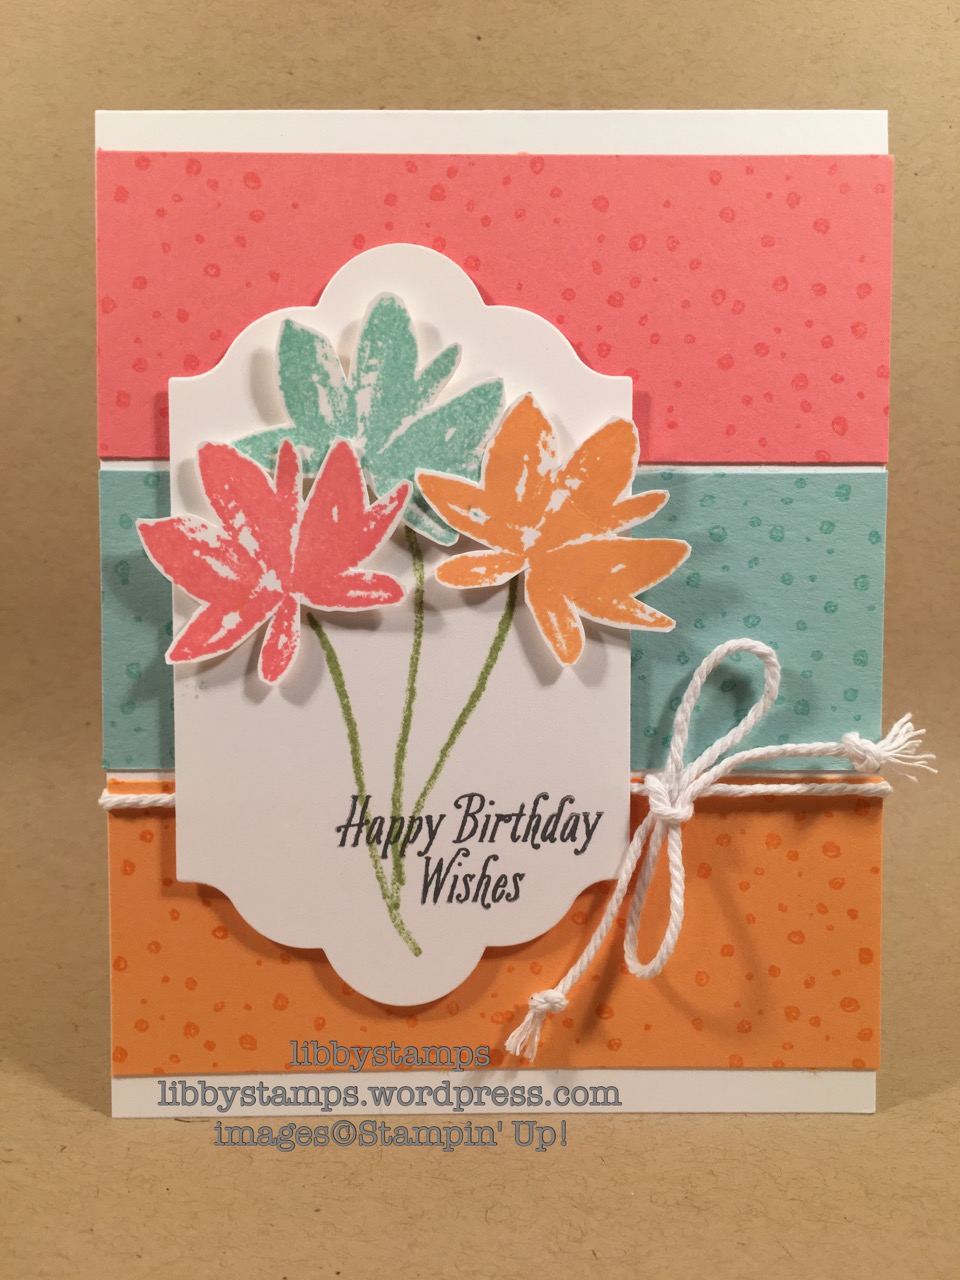 libbystamps, stampin up, Avant Garden, Lots of Labels, tgifc89,birthday card, SAB2017